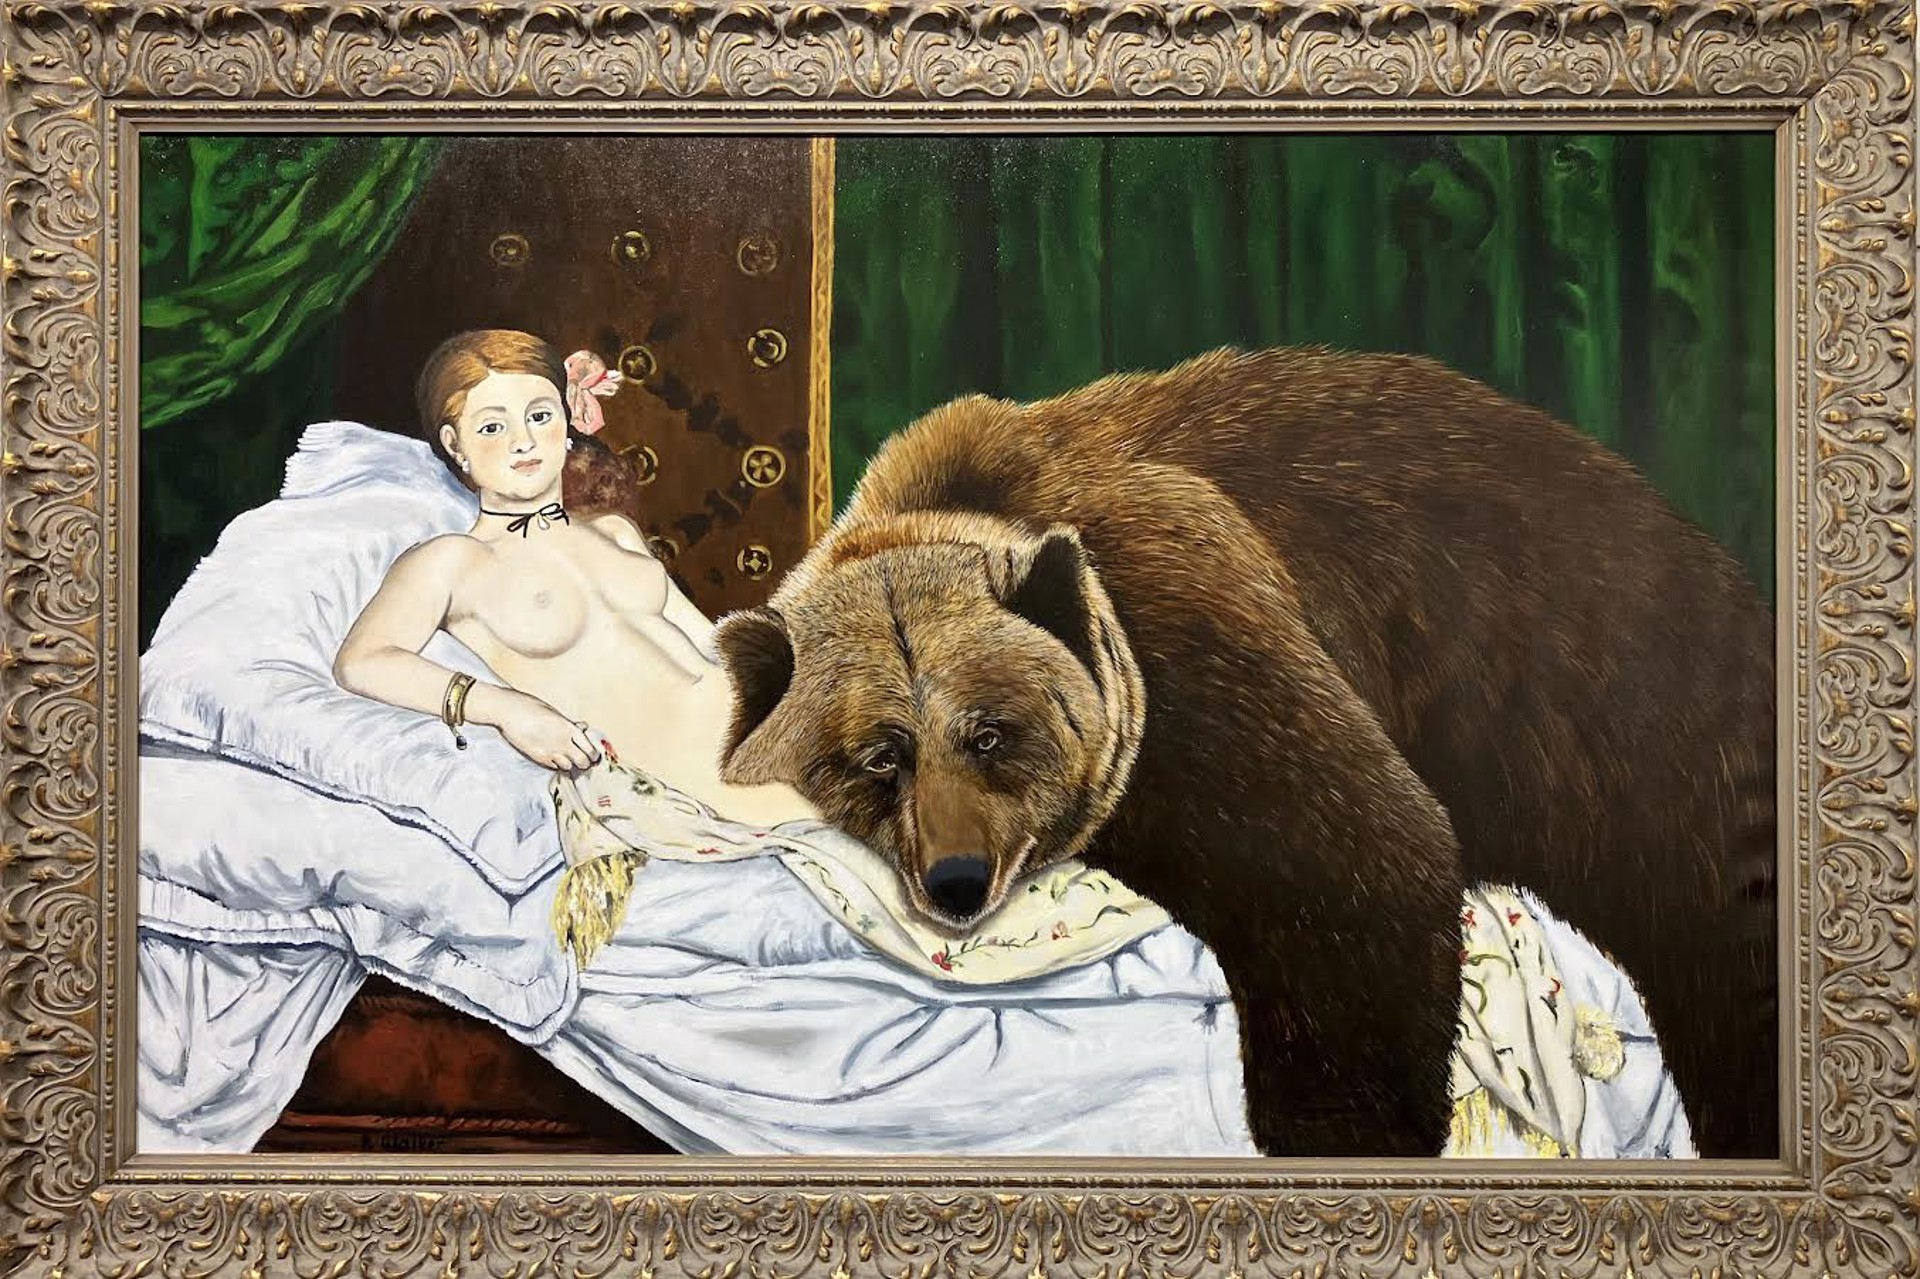 Olympia and Bear by PHILIPPE WALKER